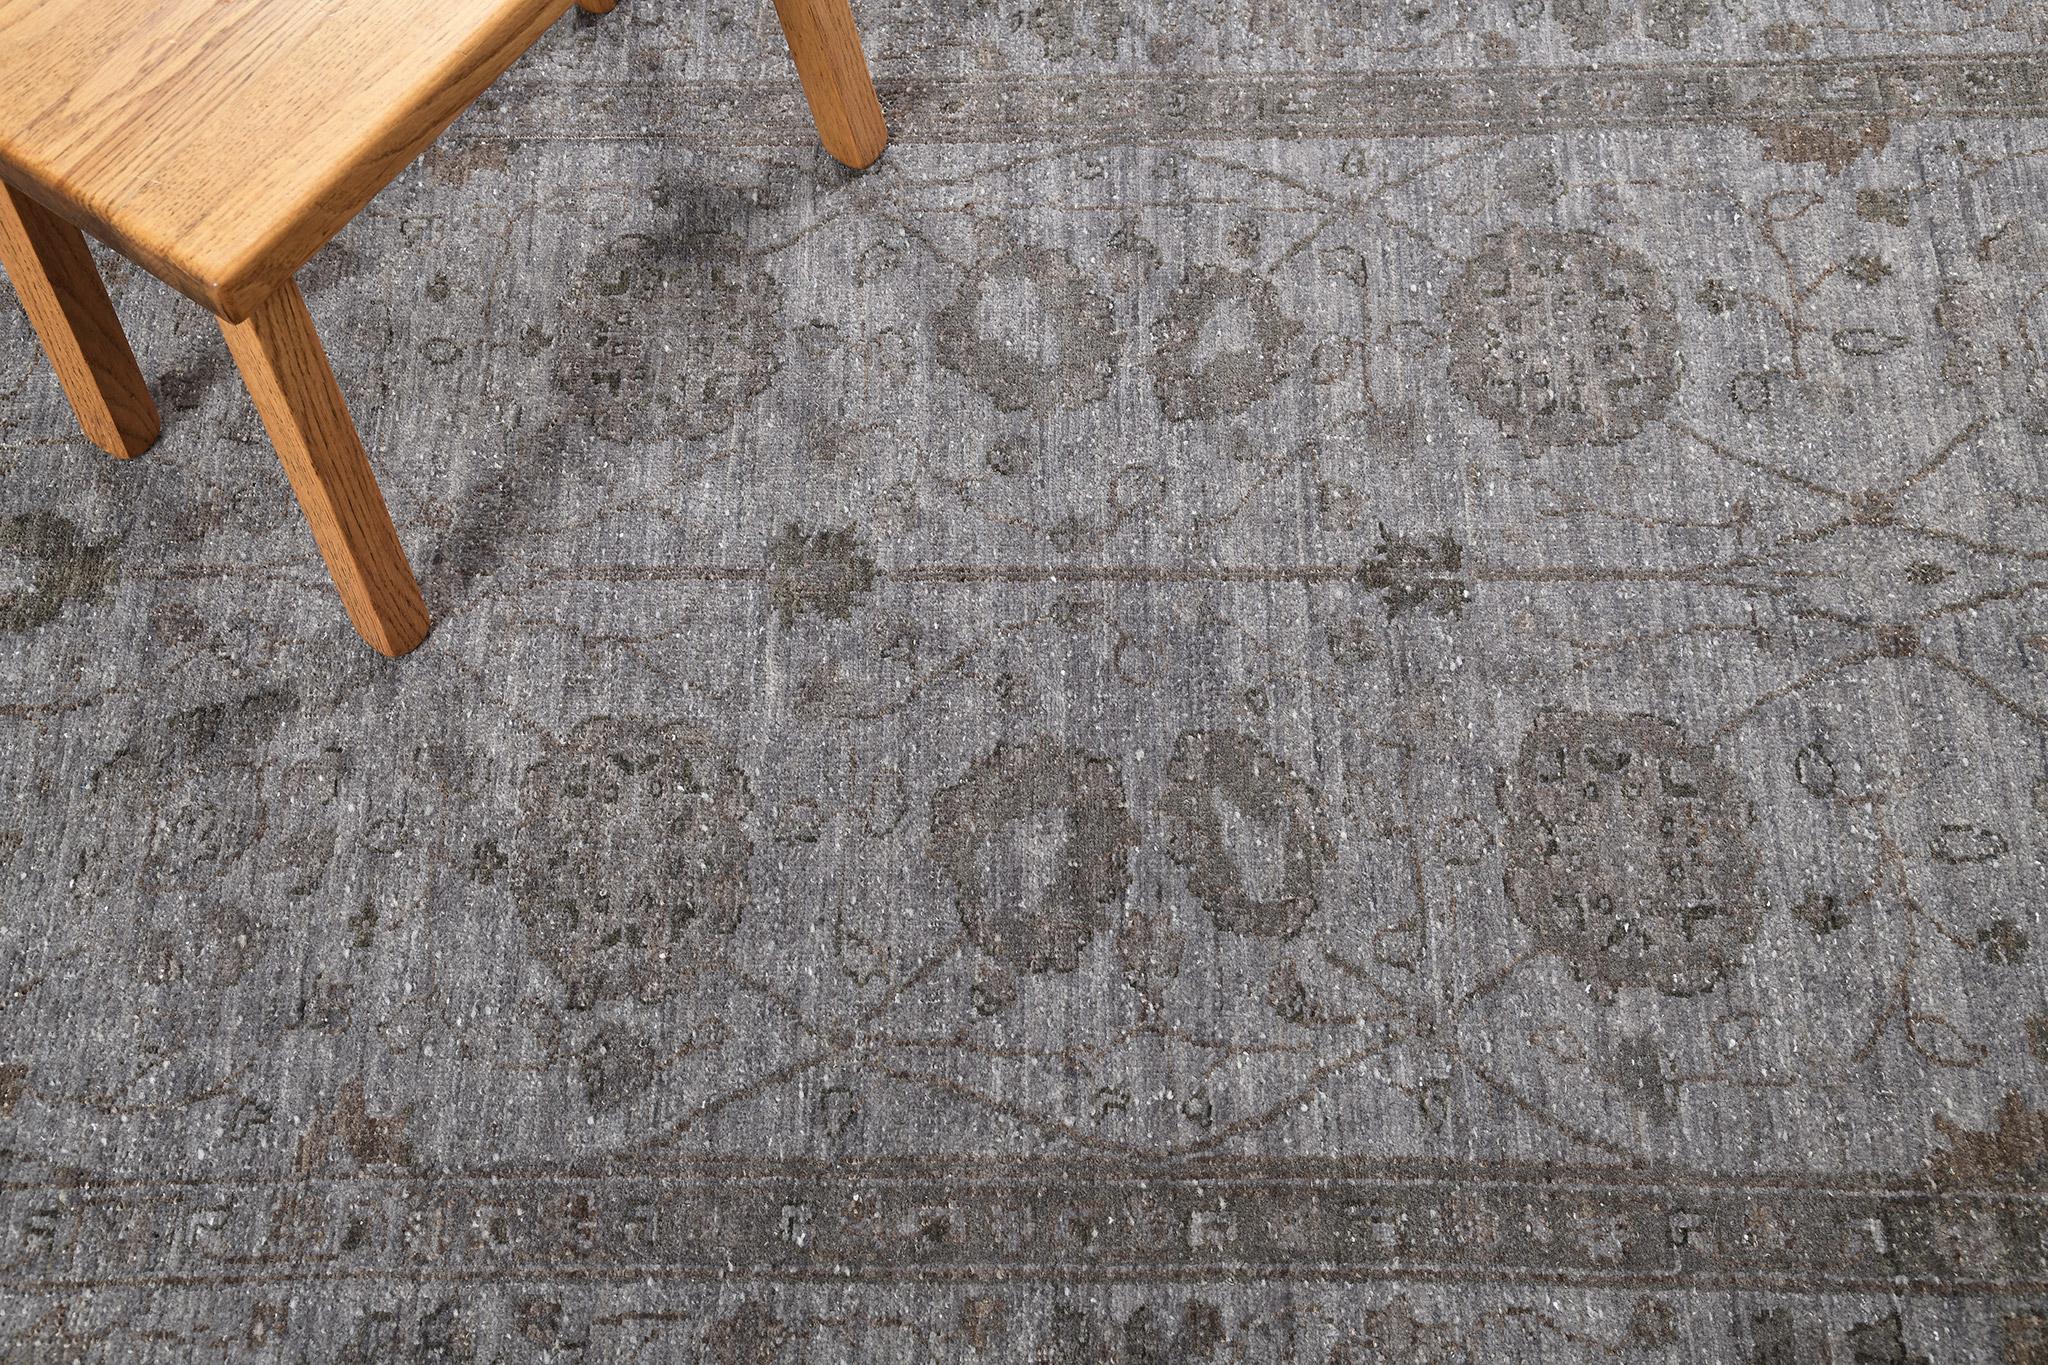 This Overdyed Agra runner revival is an outstanding masterpiece. The wool is soft and flexible yet strong to last a lifetime. With its understated design and gorgeous symmetry, this woven piece of art exudes elegance from every thread. A centerpiece